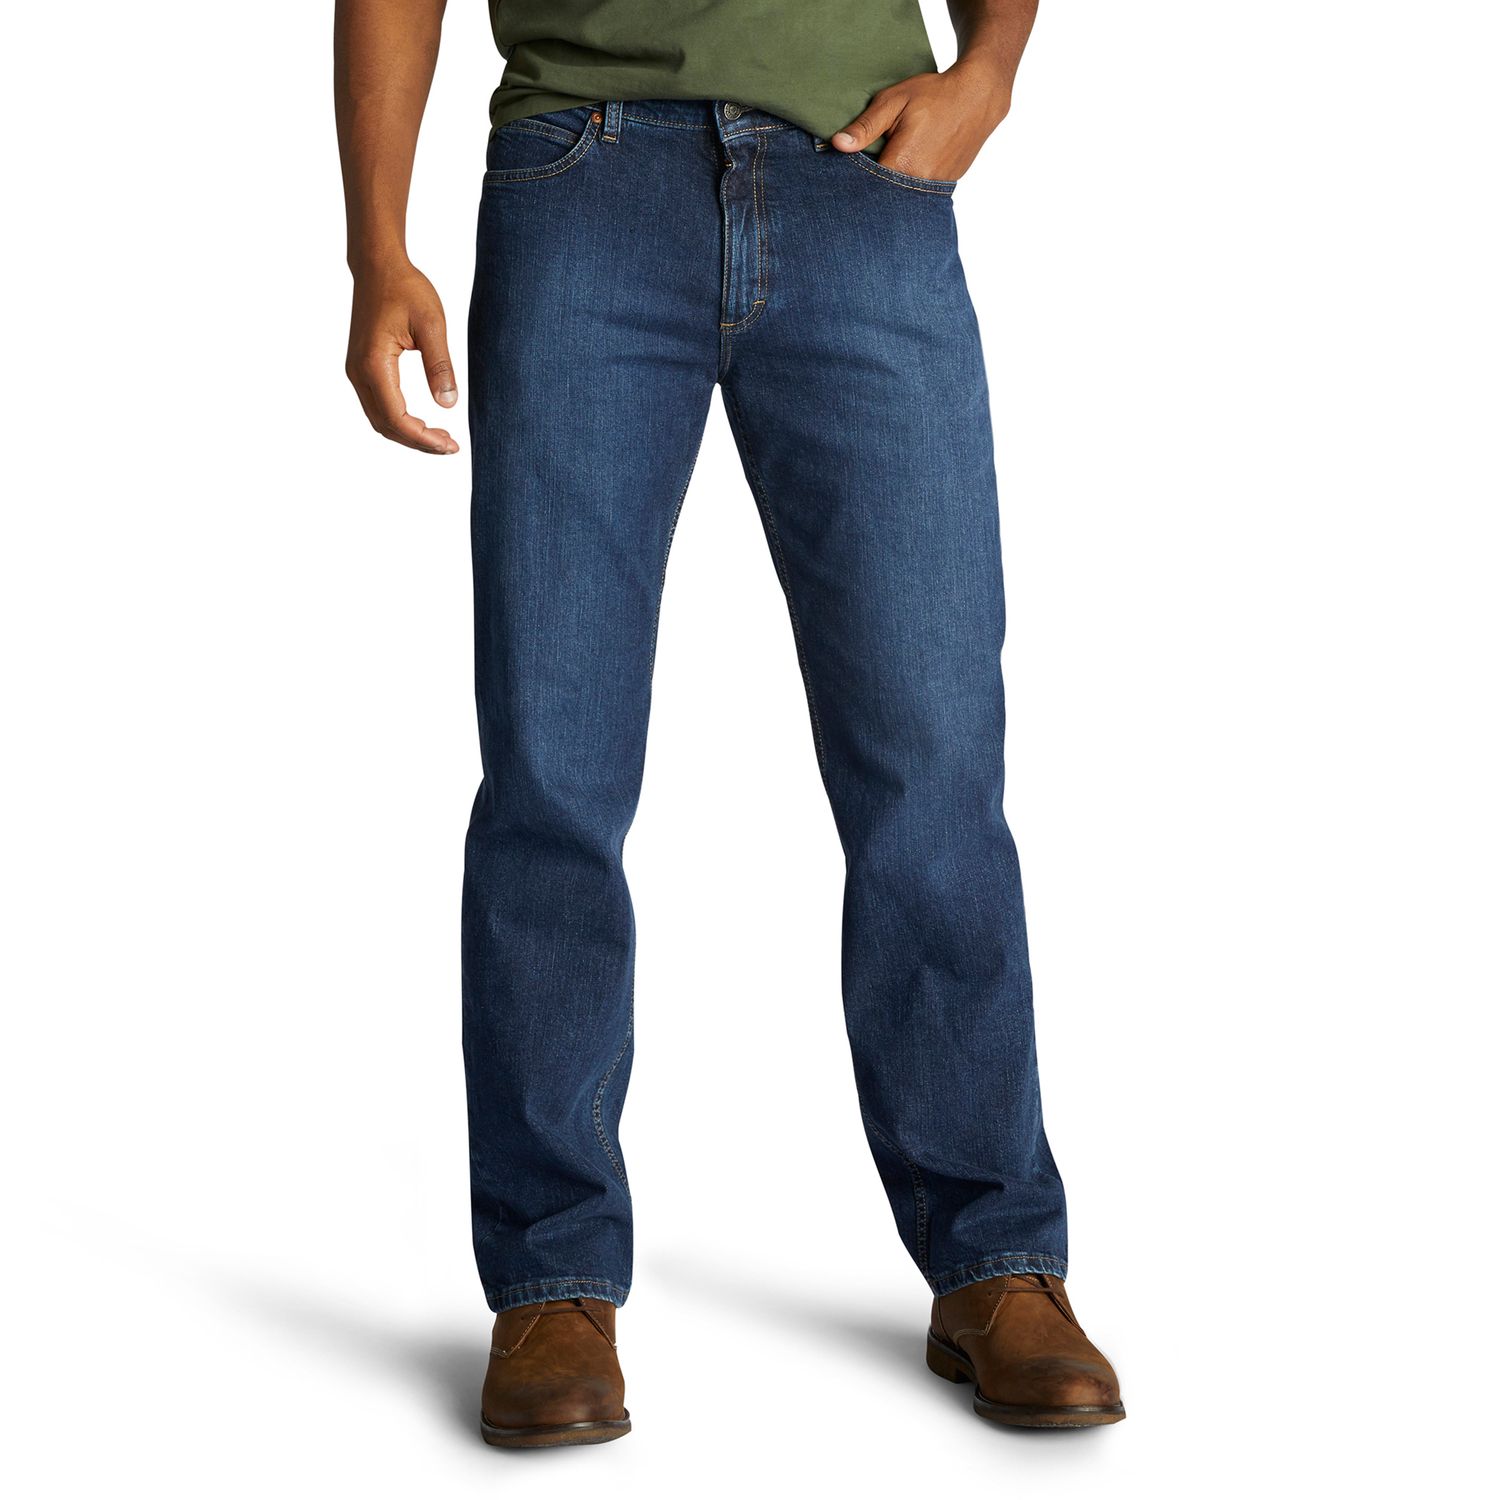 Image for Lee Men's Relaxed Fit Stretch Jeans at Kohl's.